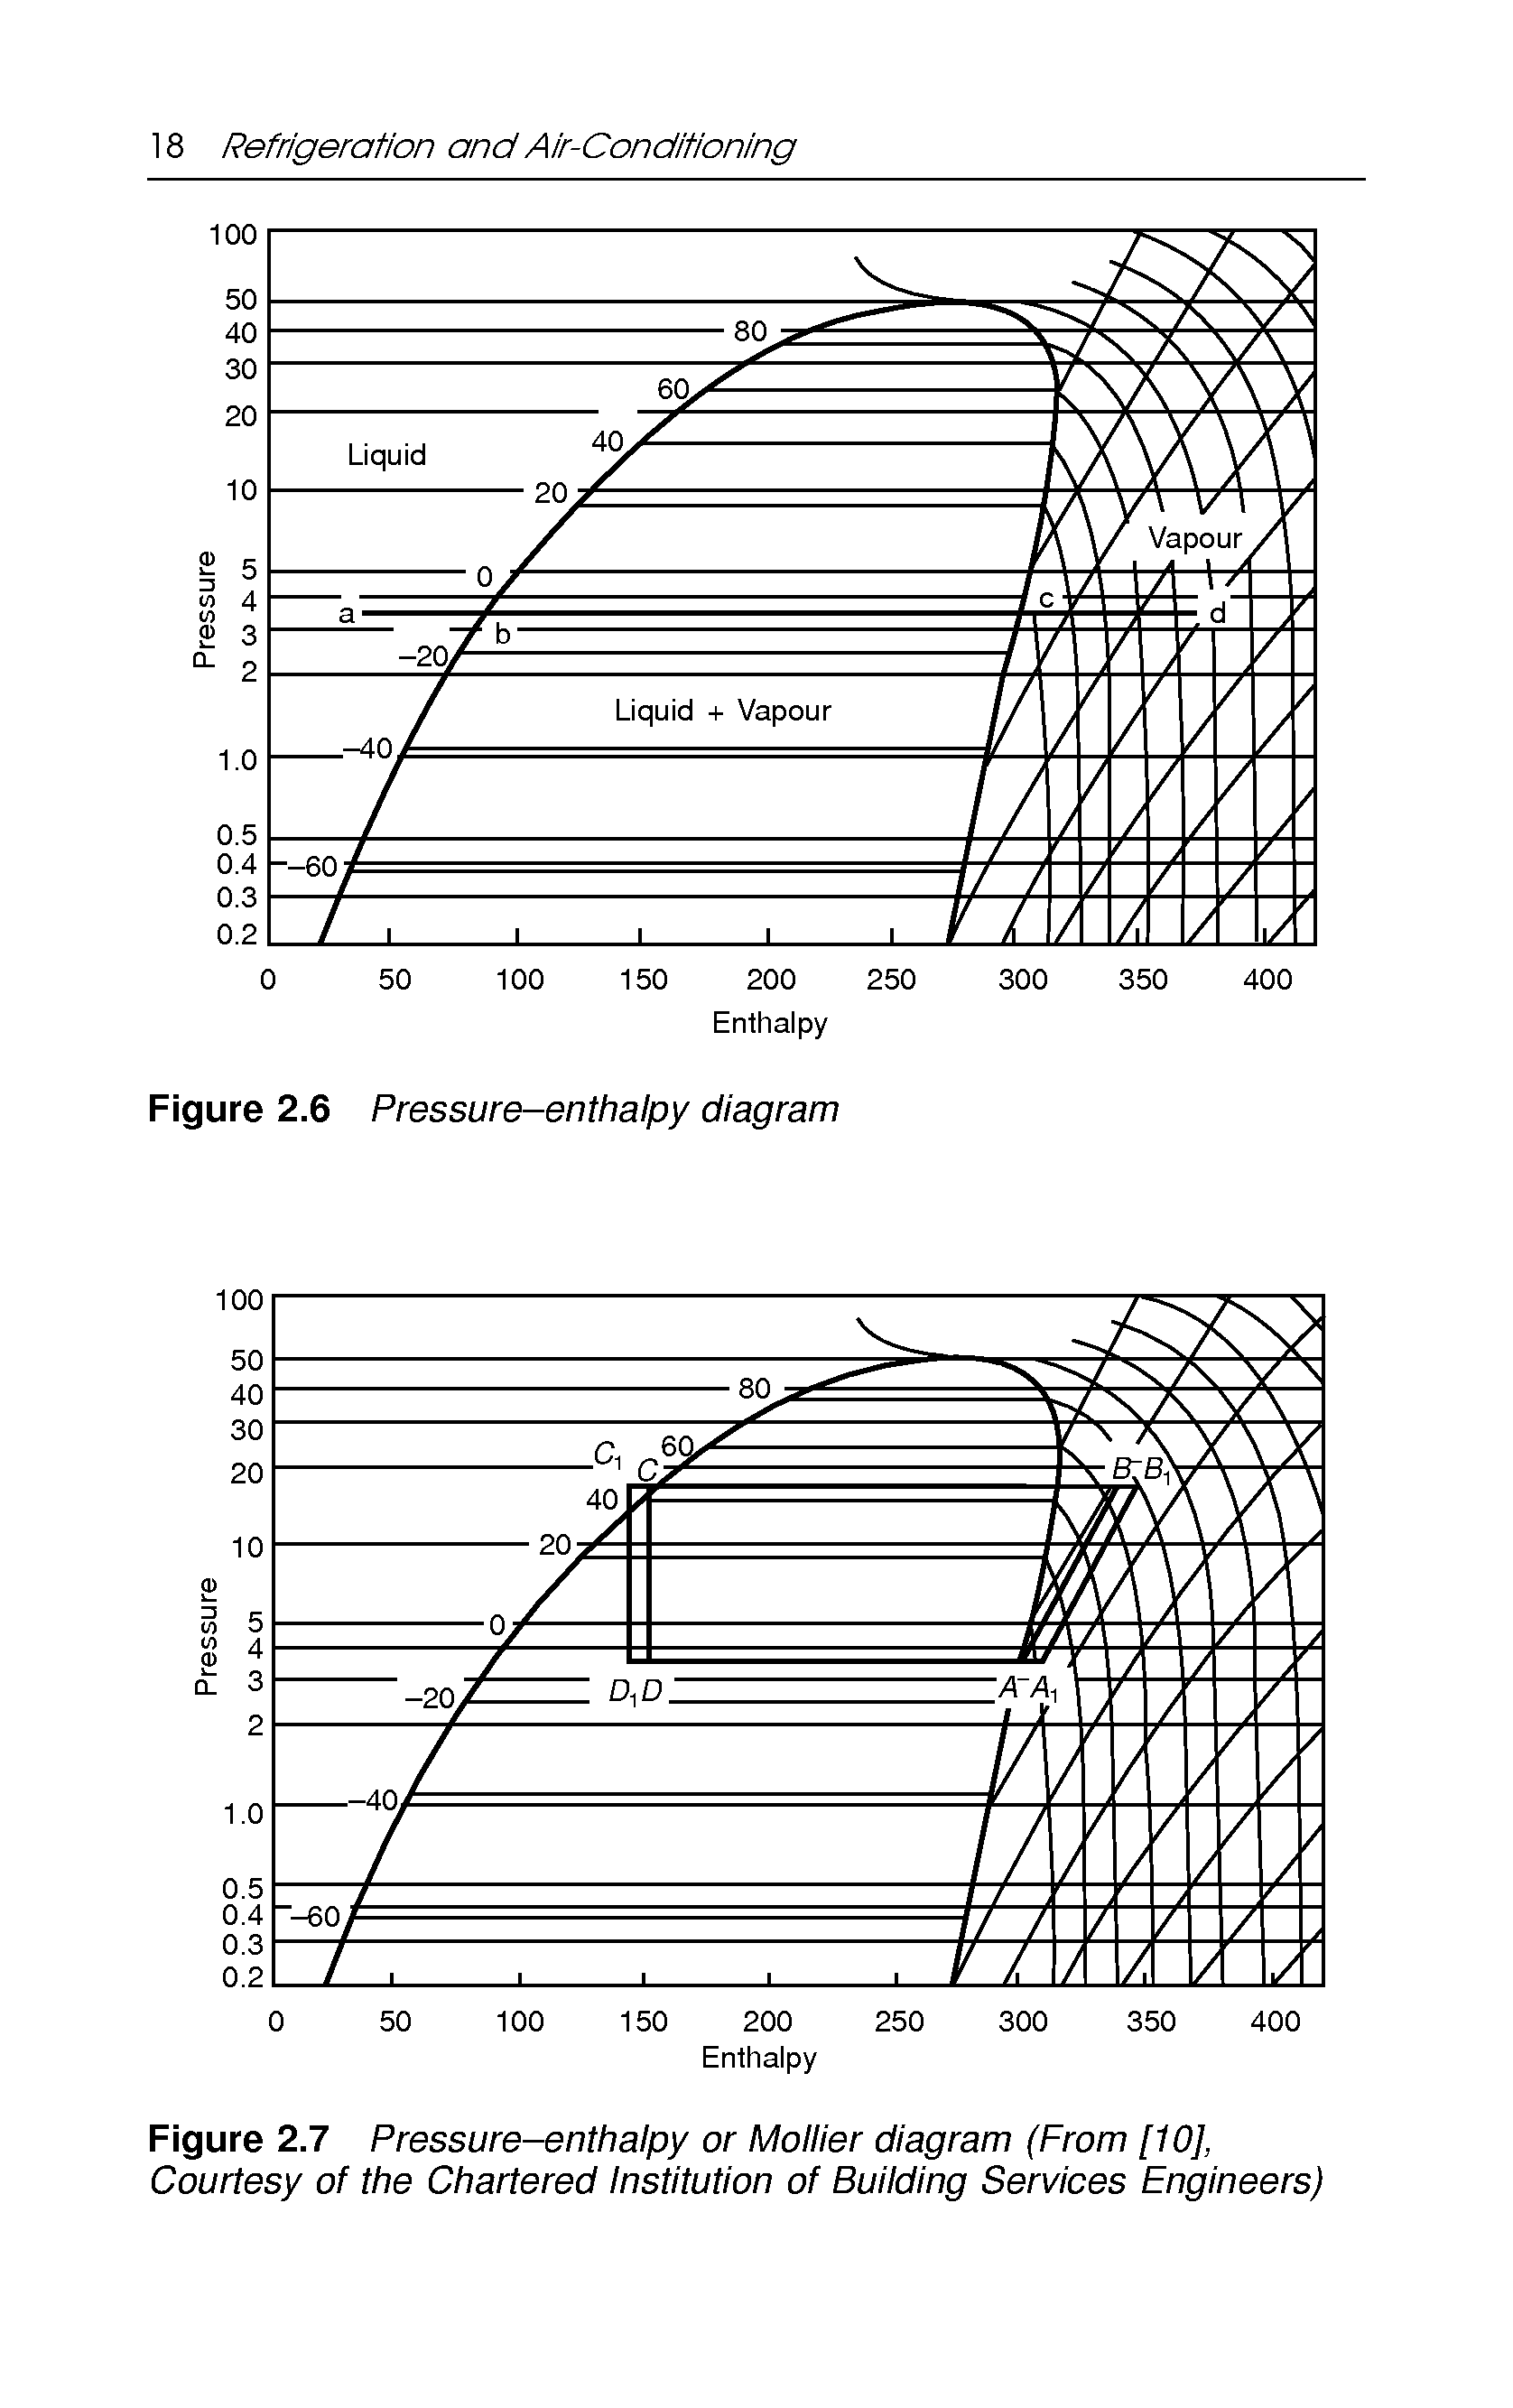 Figure 2.7 Pressure-enthalpy or Mollier diagram (From [10], Courtesy of the Chartered Institution of Building Services Engineers)...